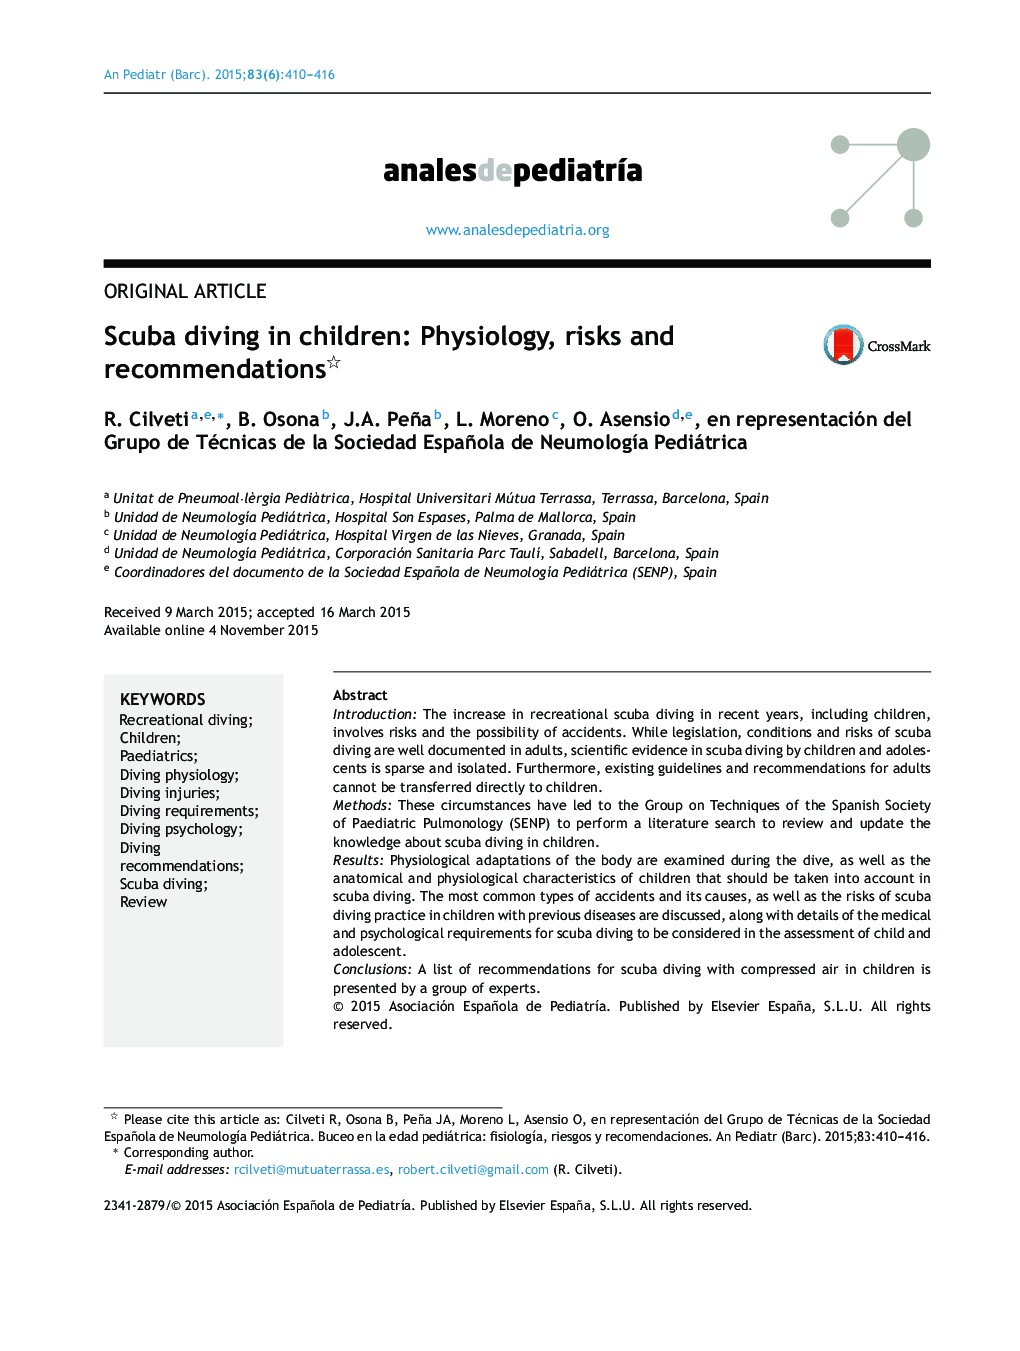 Scuba diving in children: Physiology, risks and recommendations 